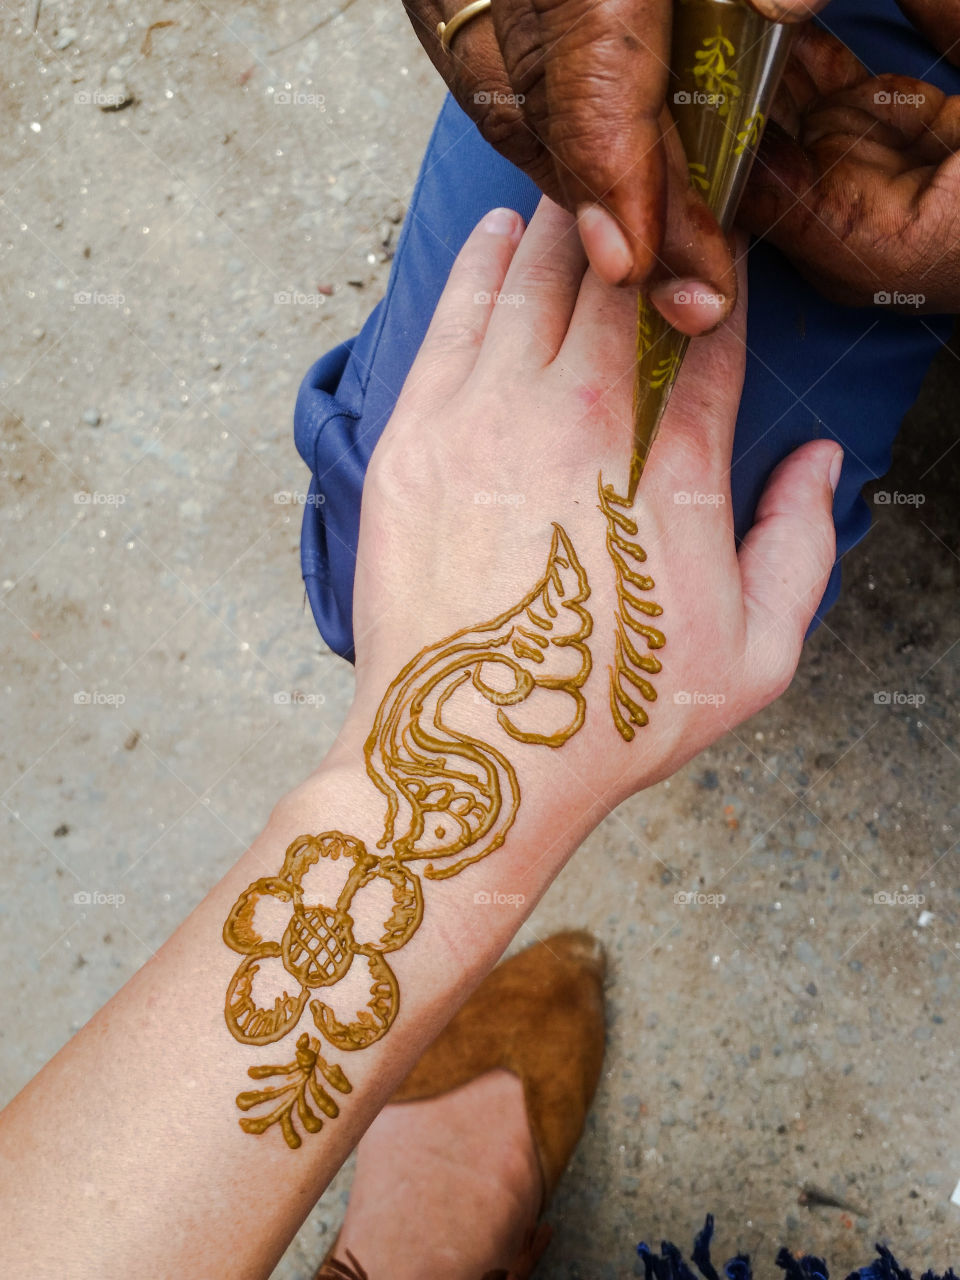 henna art. festival time in Nepal and all girls do henna